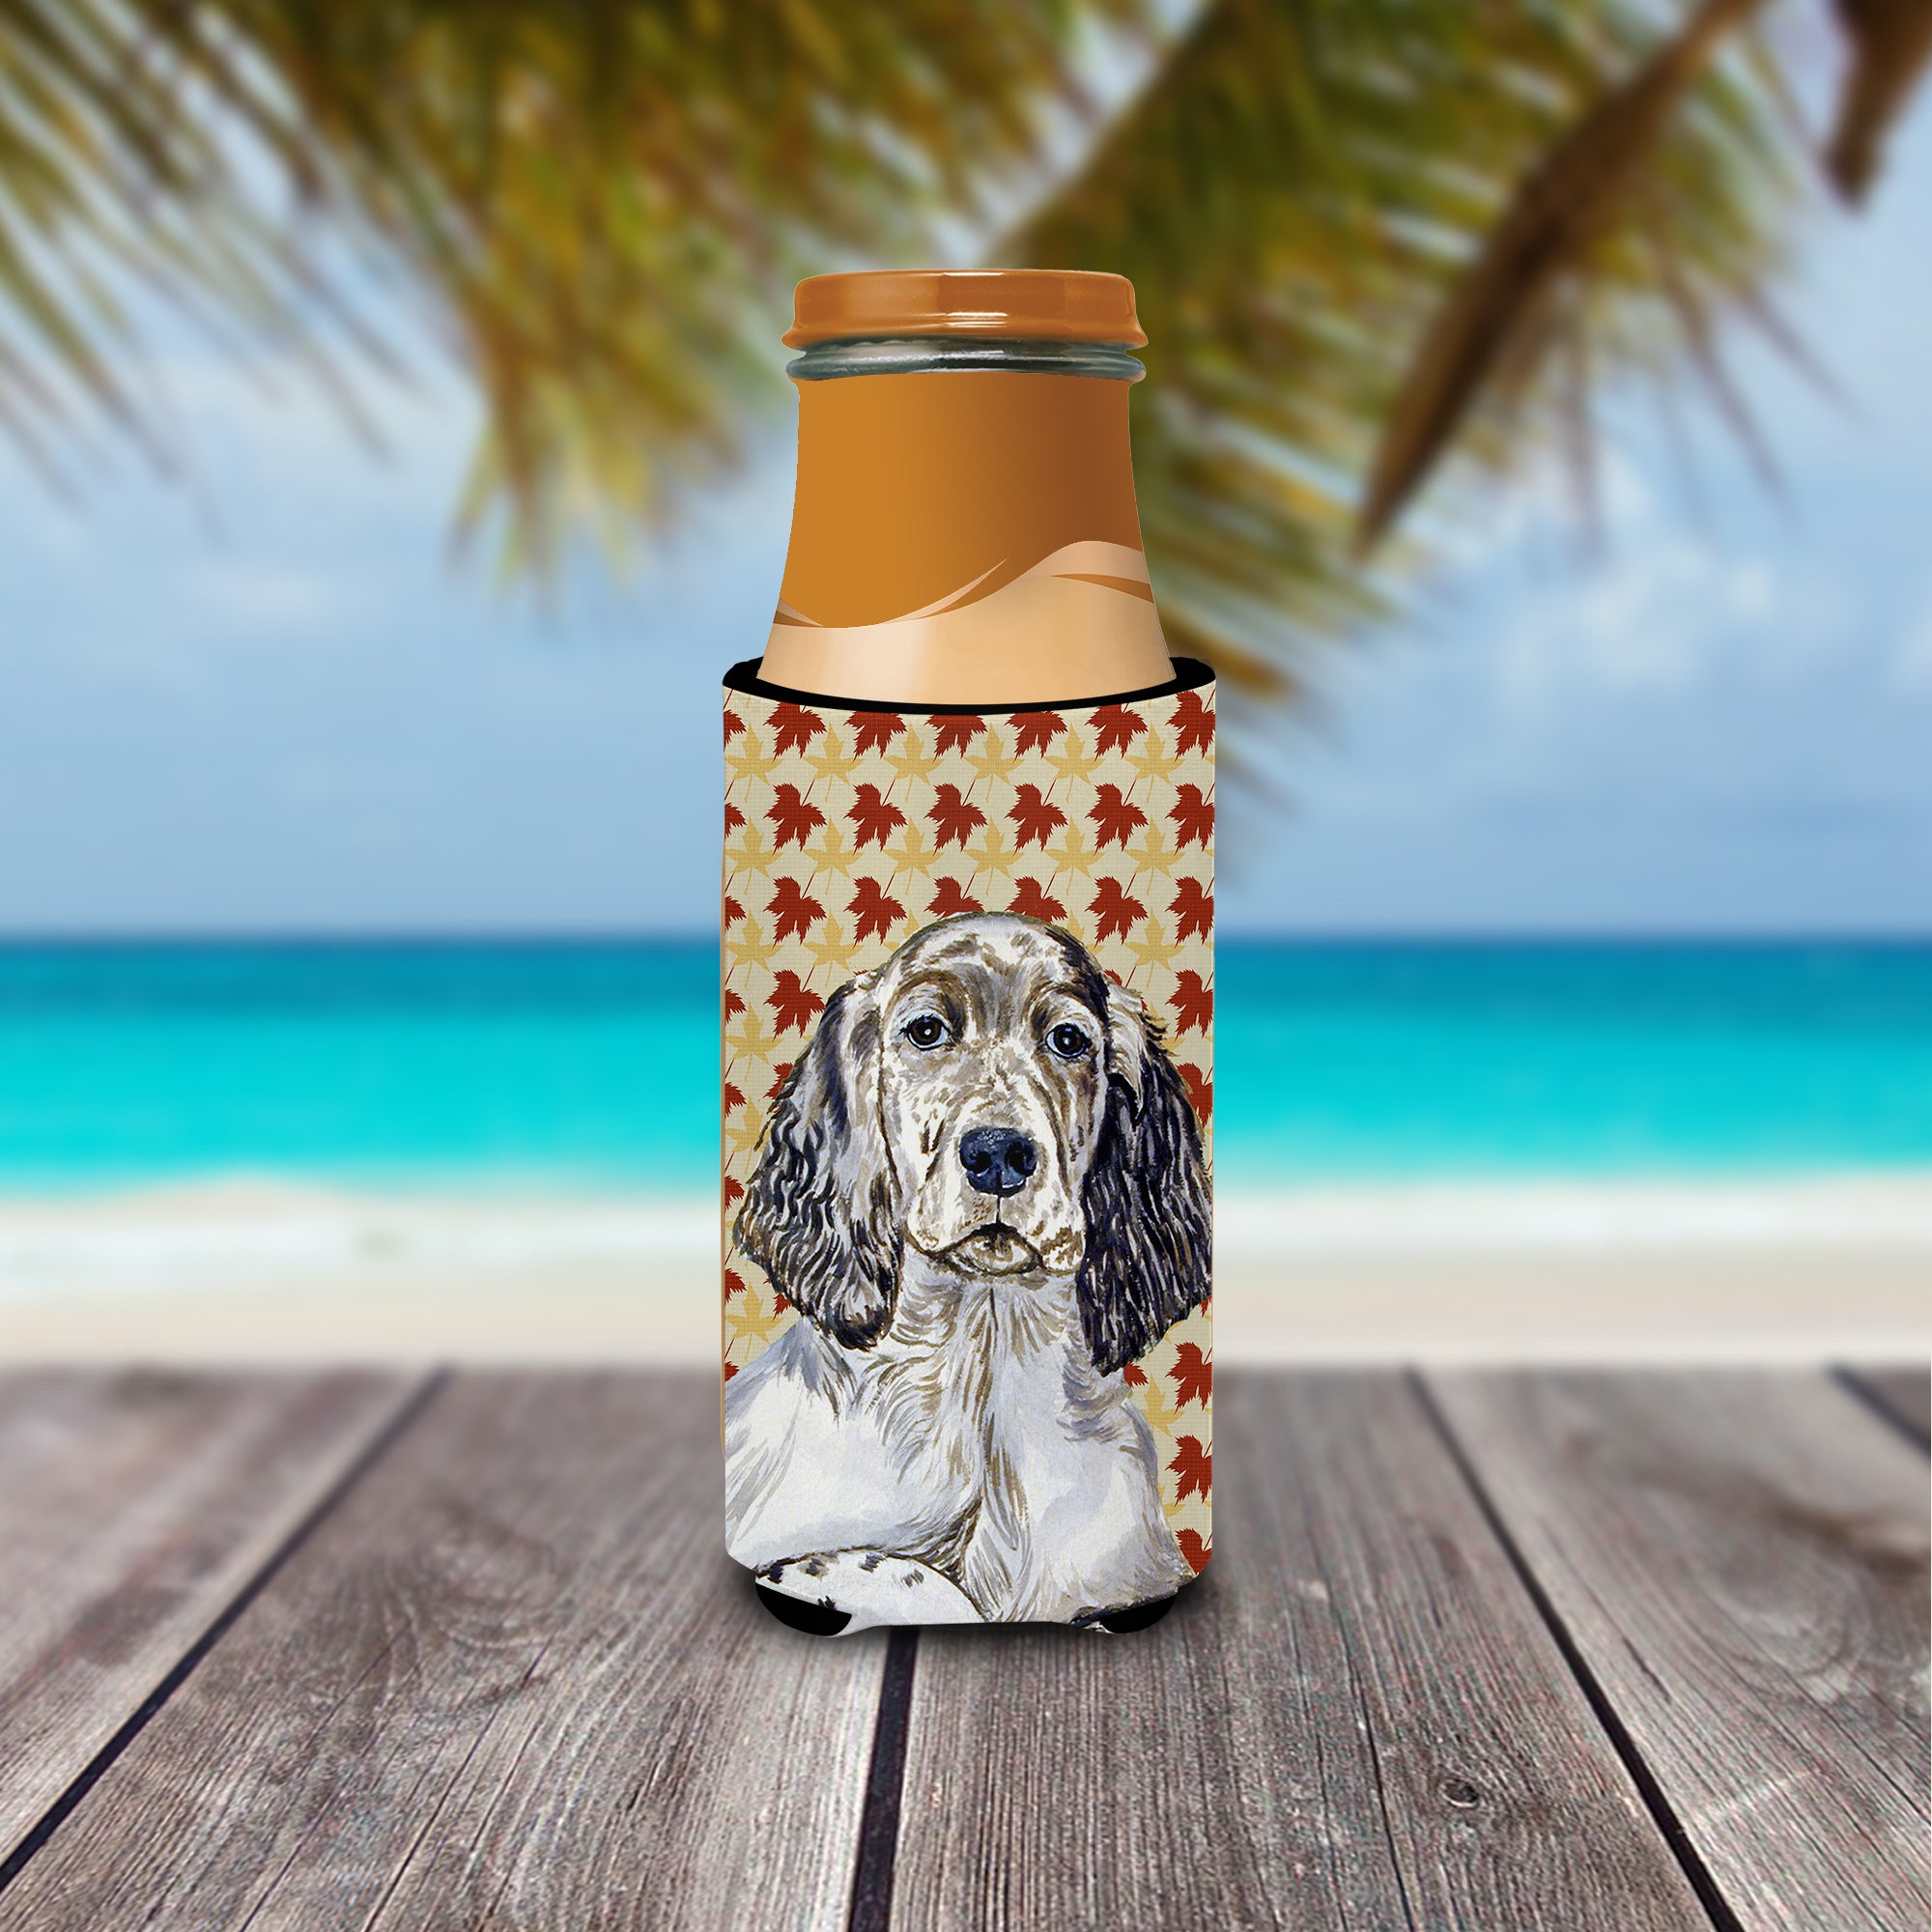 English Setter Fall Leaves Portrait Ultra Beverage Insulators for slim cans LH9097MUK.